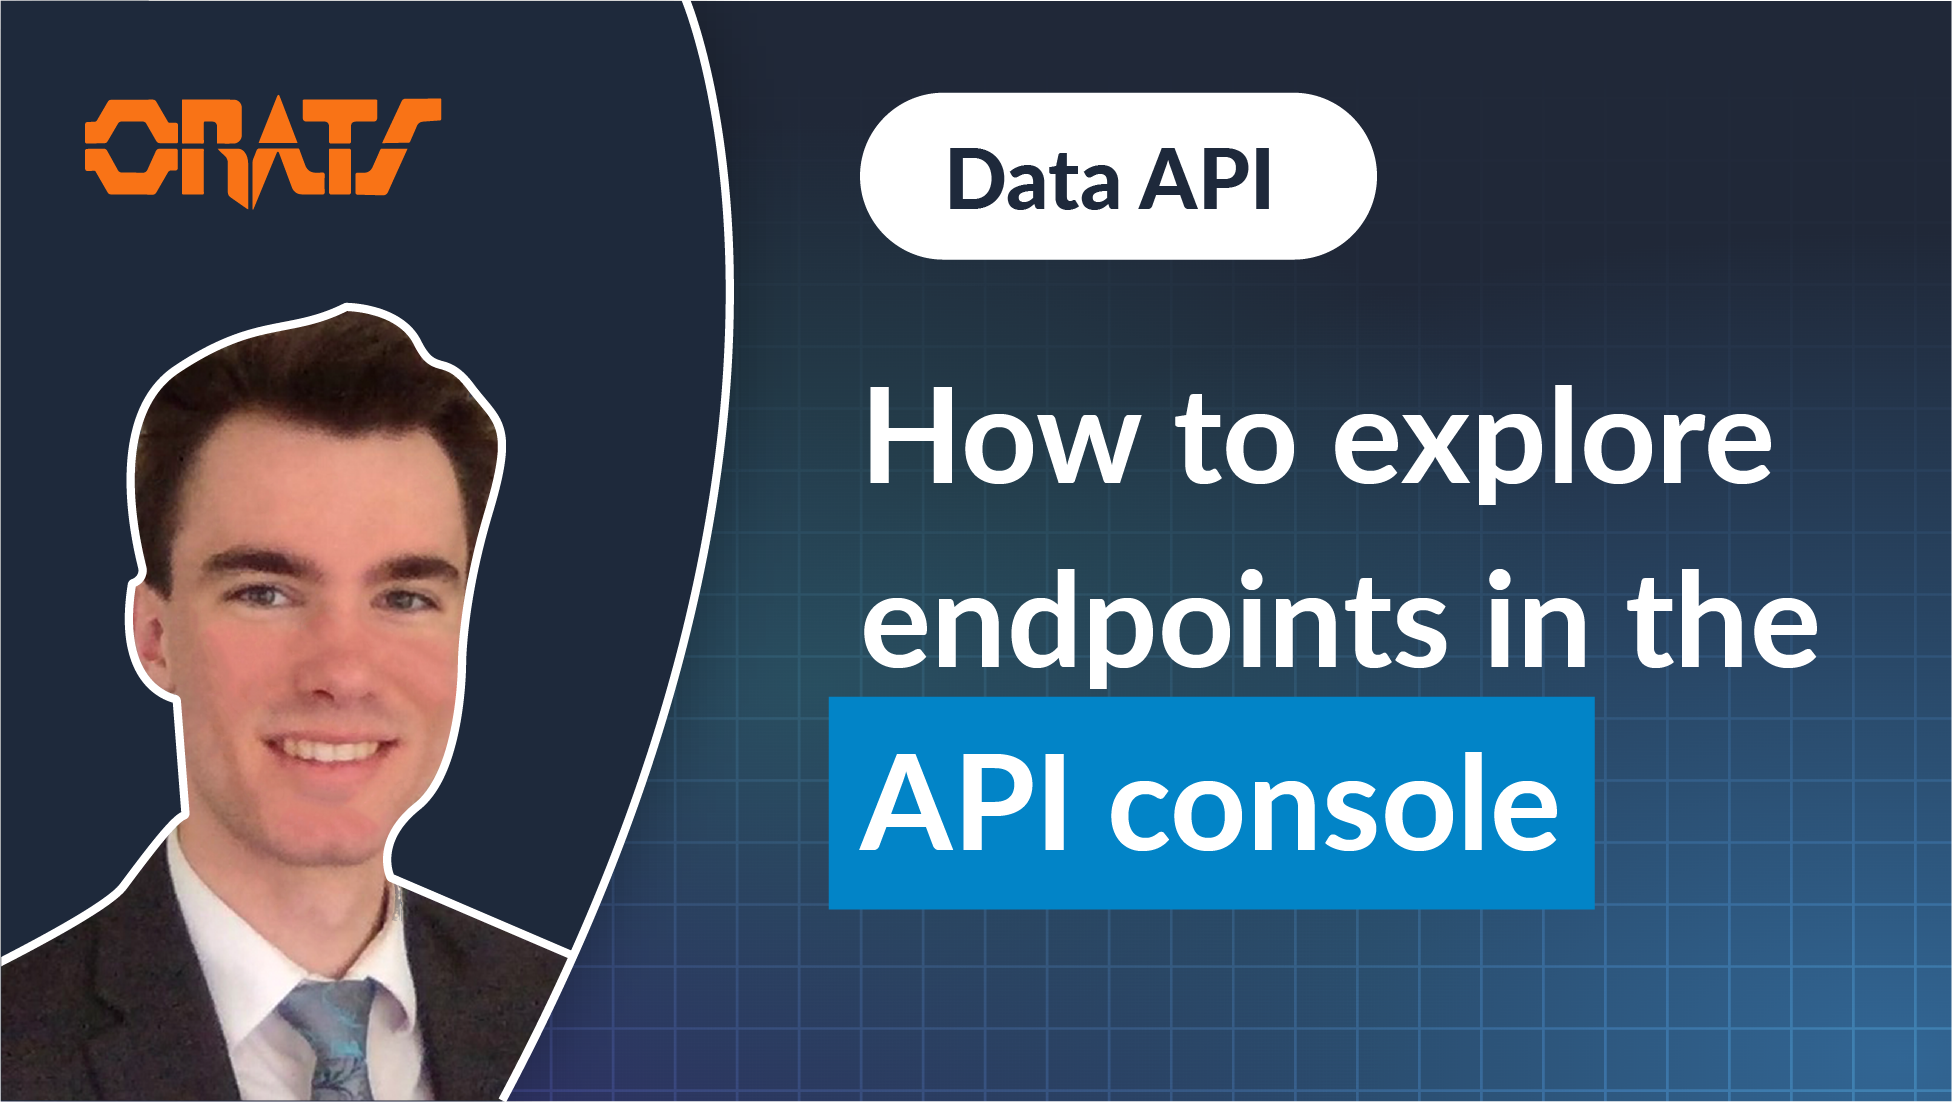 How to Explore Endpoints in the API Console